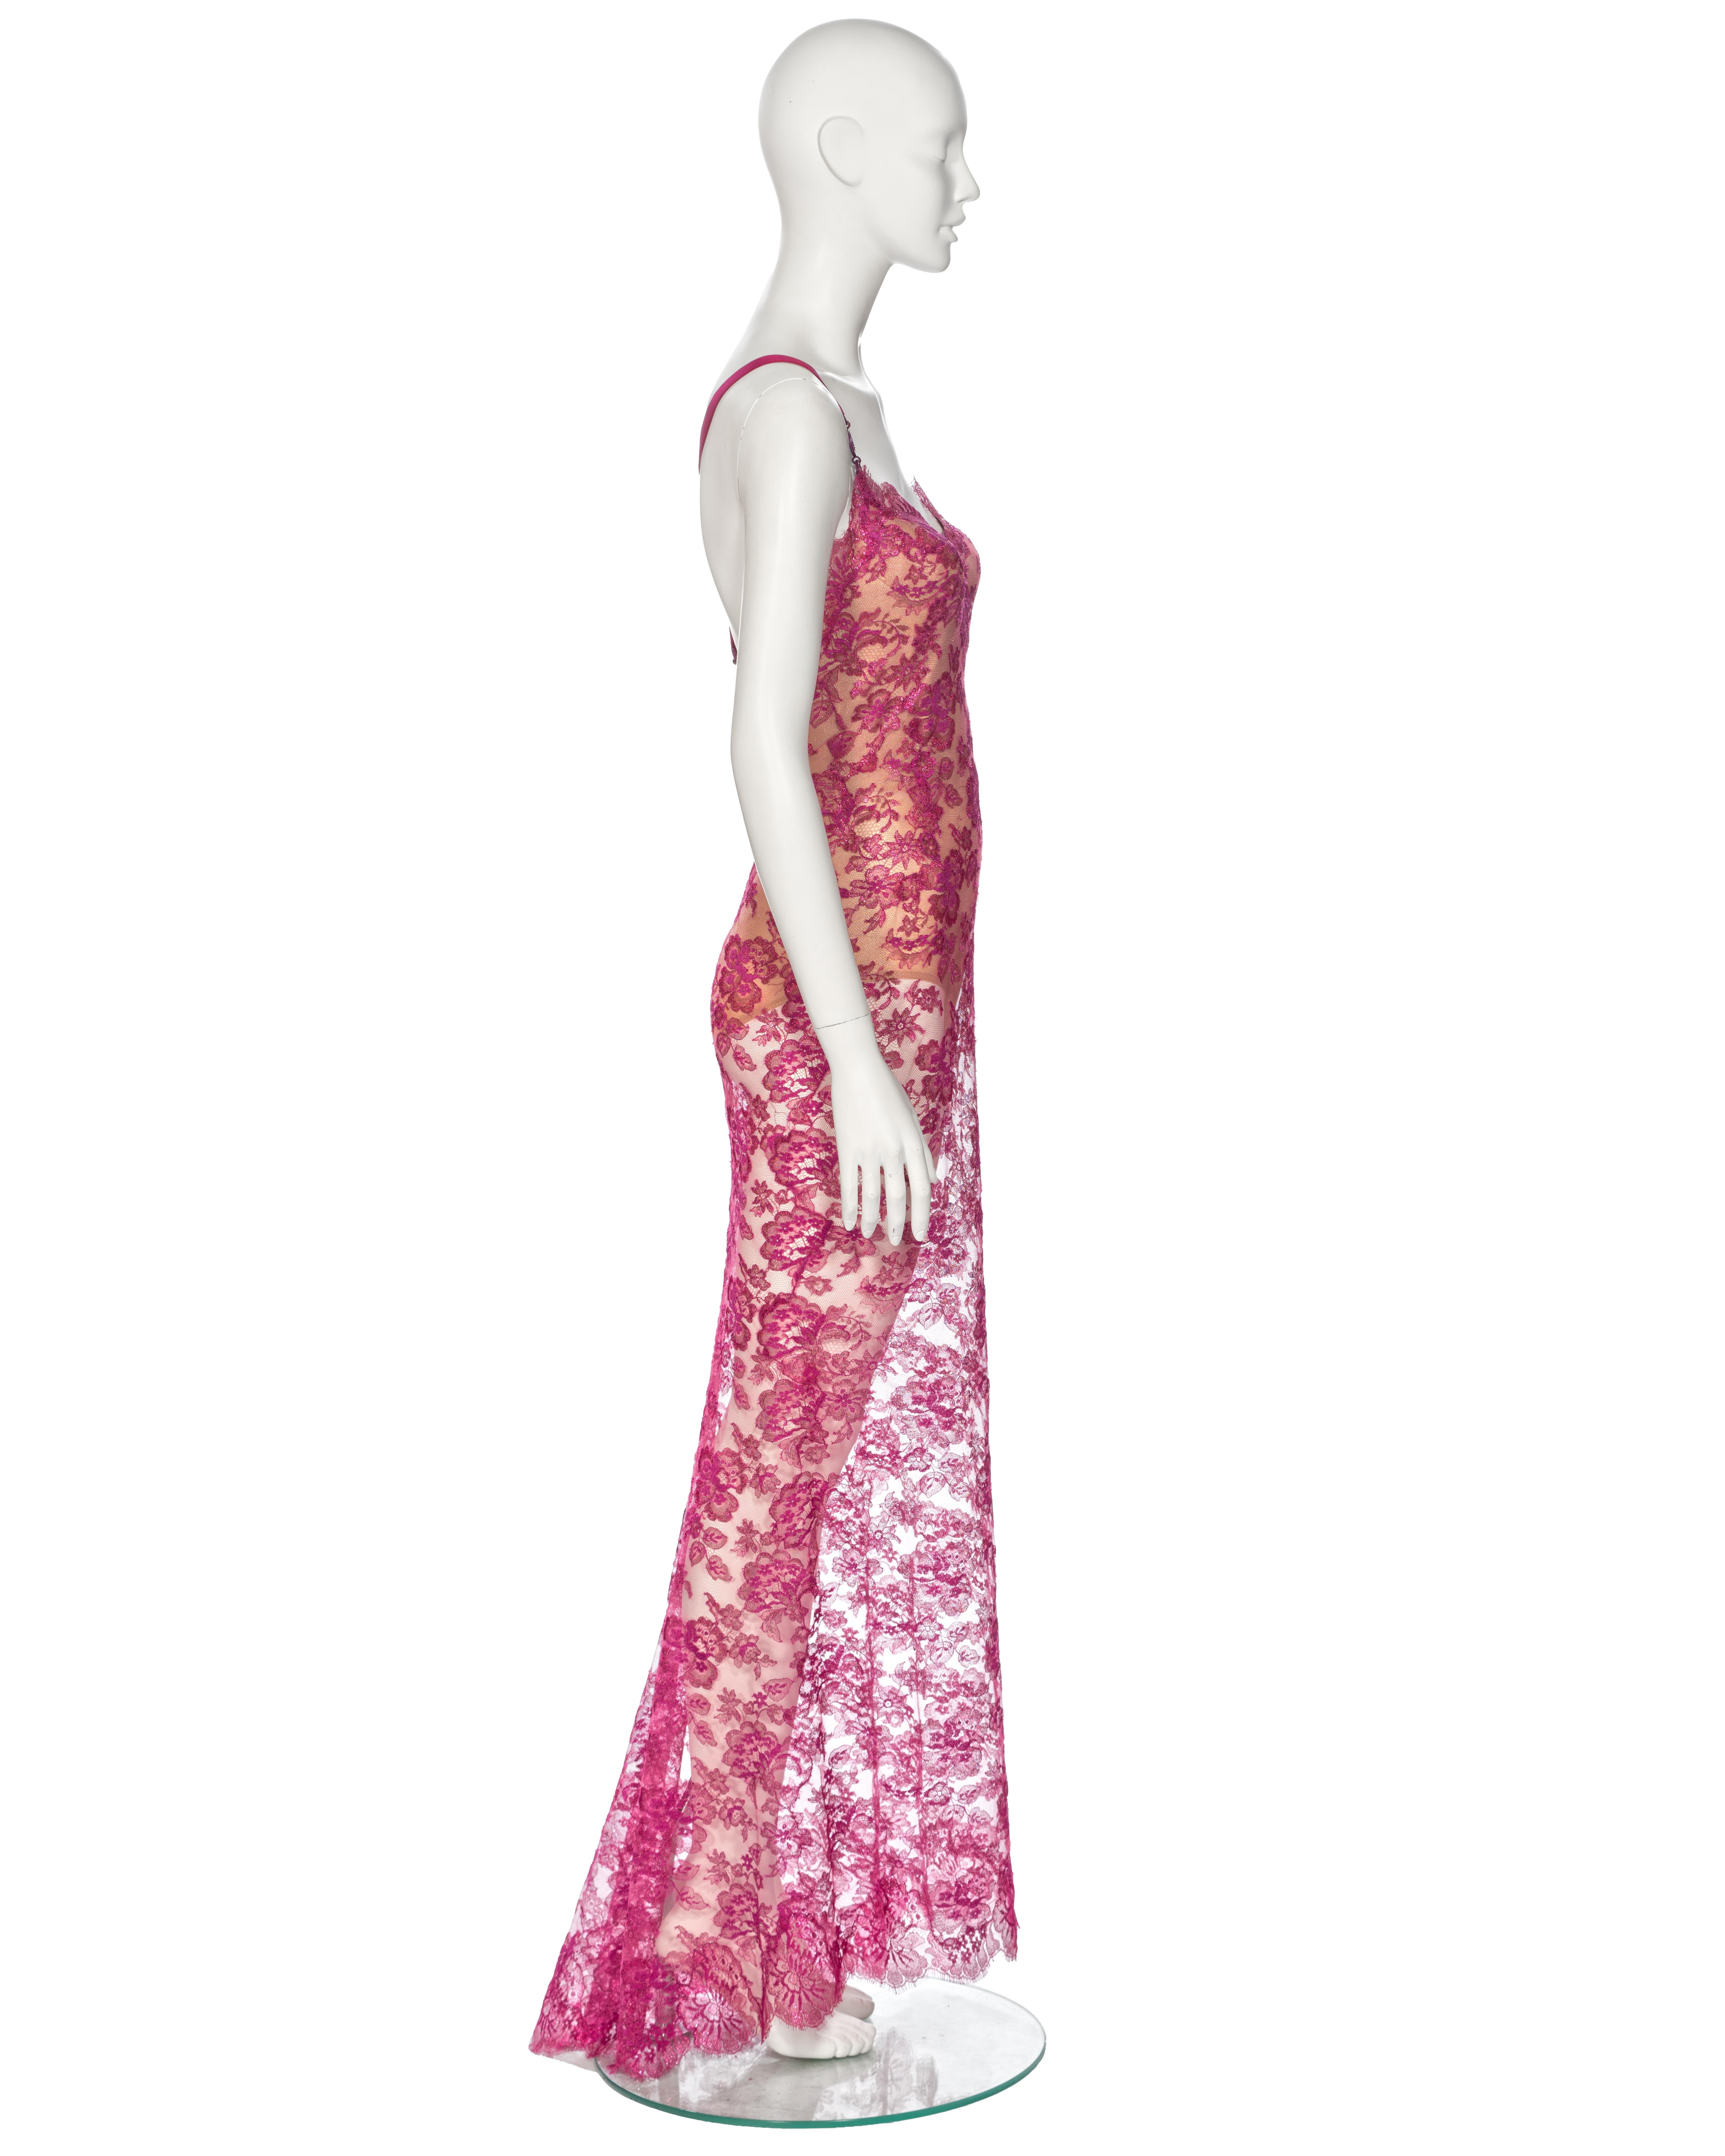 Atelier Versace Metallic Pink Couture Evening Dress and Bag, ss 1996 For Sale 8